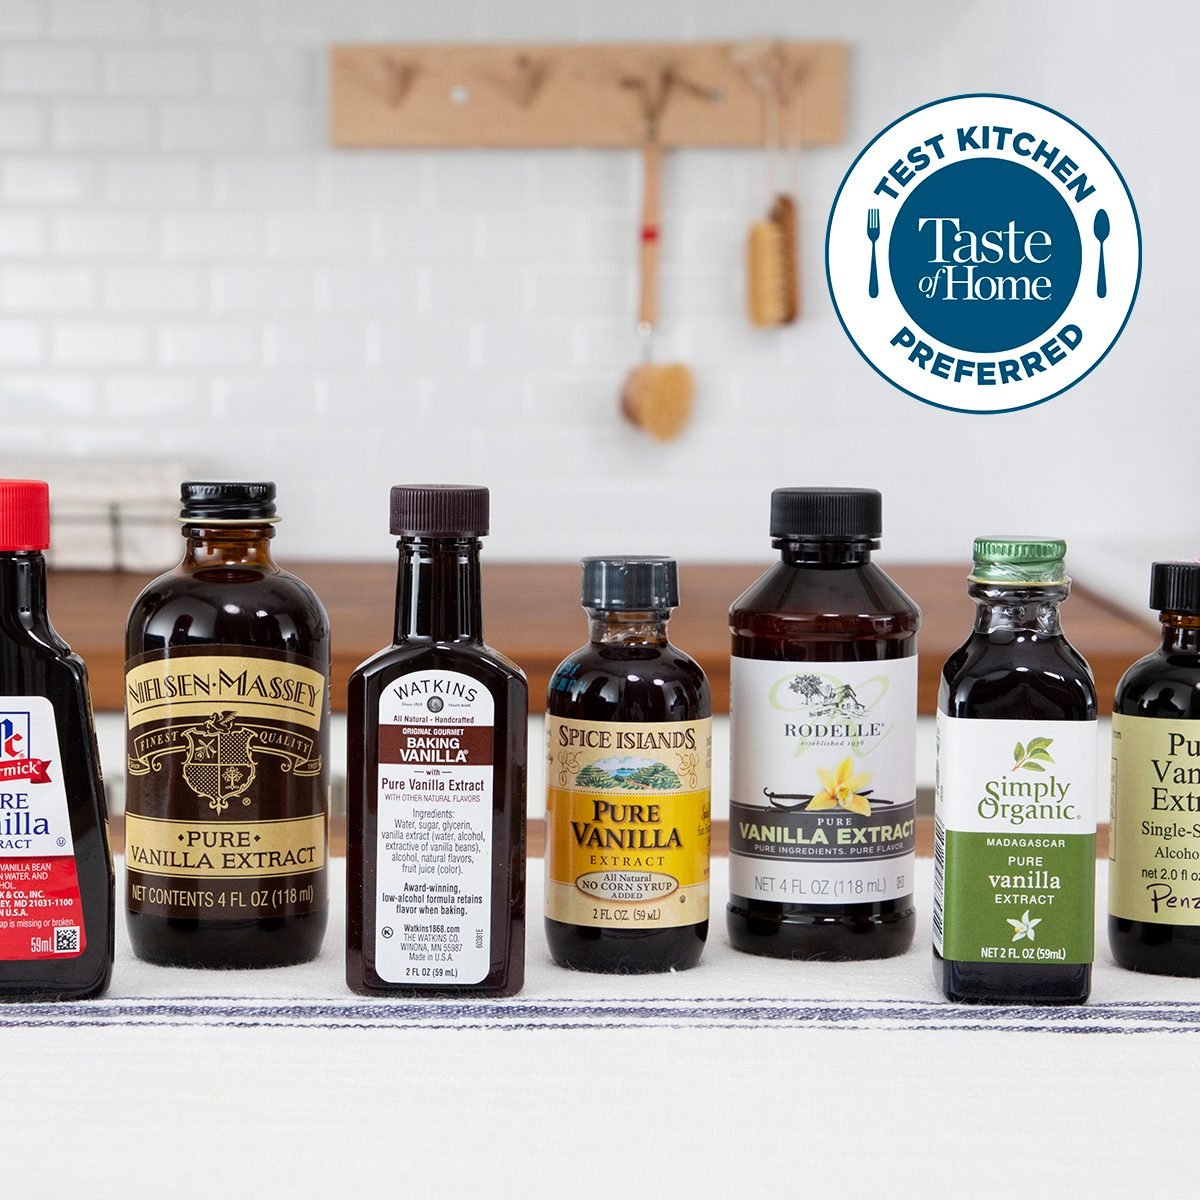 Our Test Kitchen Found the Best Vanilla Extract Brands for Baking